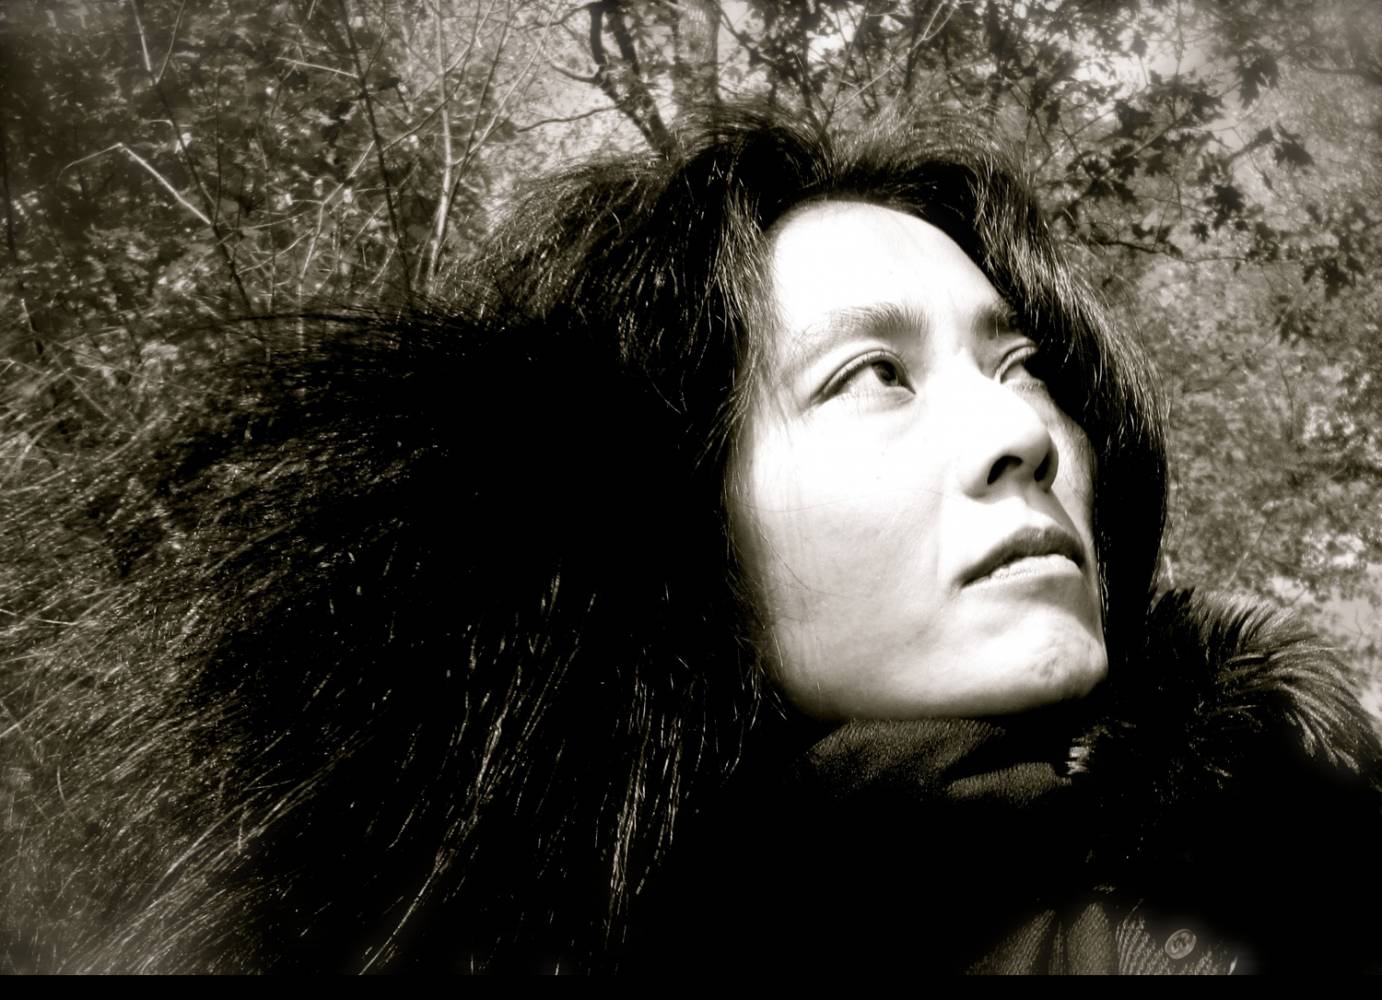 a black and white portraite of Mana Hashimoto outside in the daytime,among leaves, in a forest type setting. She faces on a high diagonal, and her hair seems wild like the twigs and branches around her